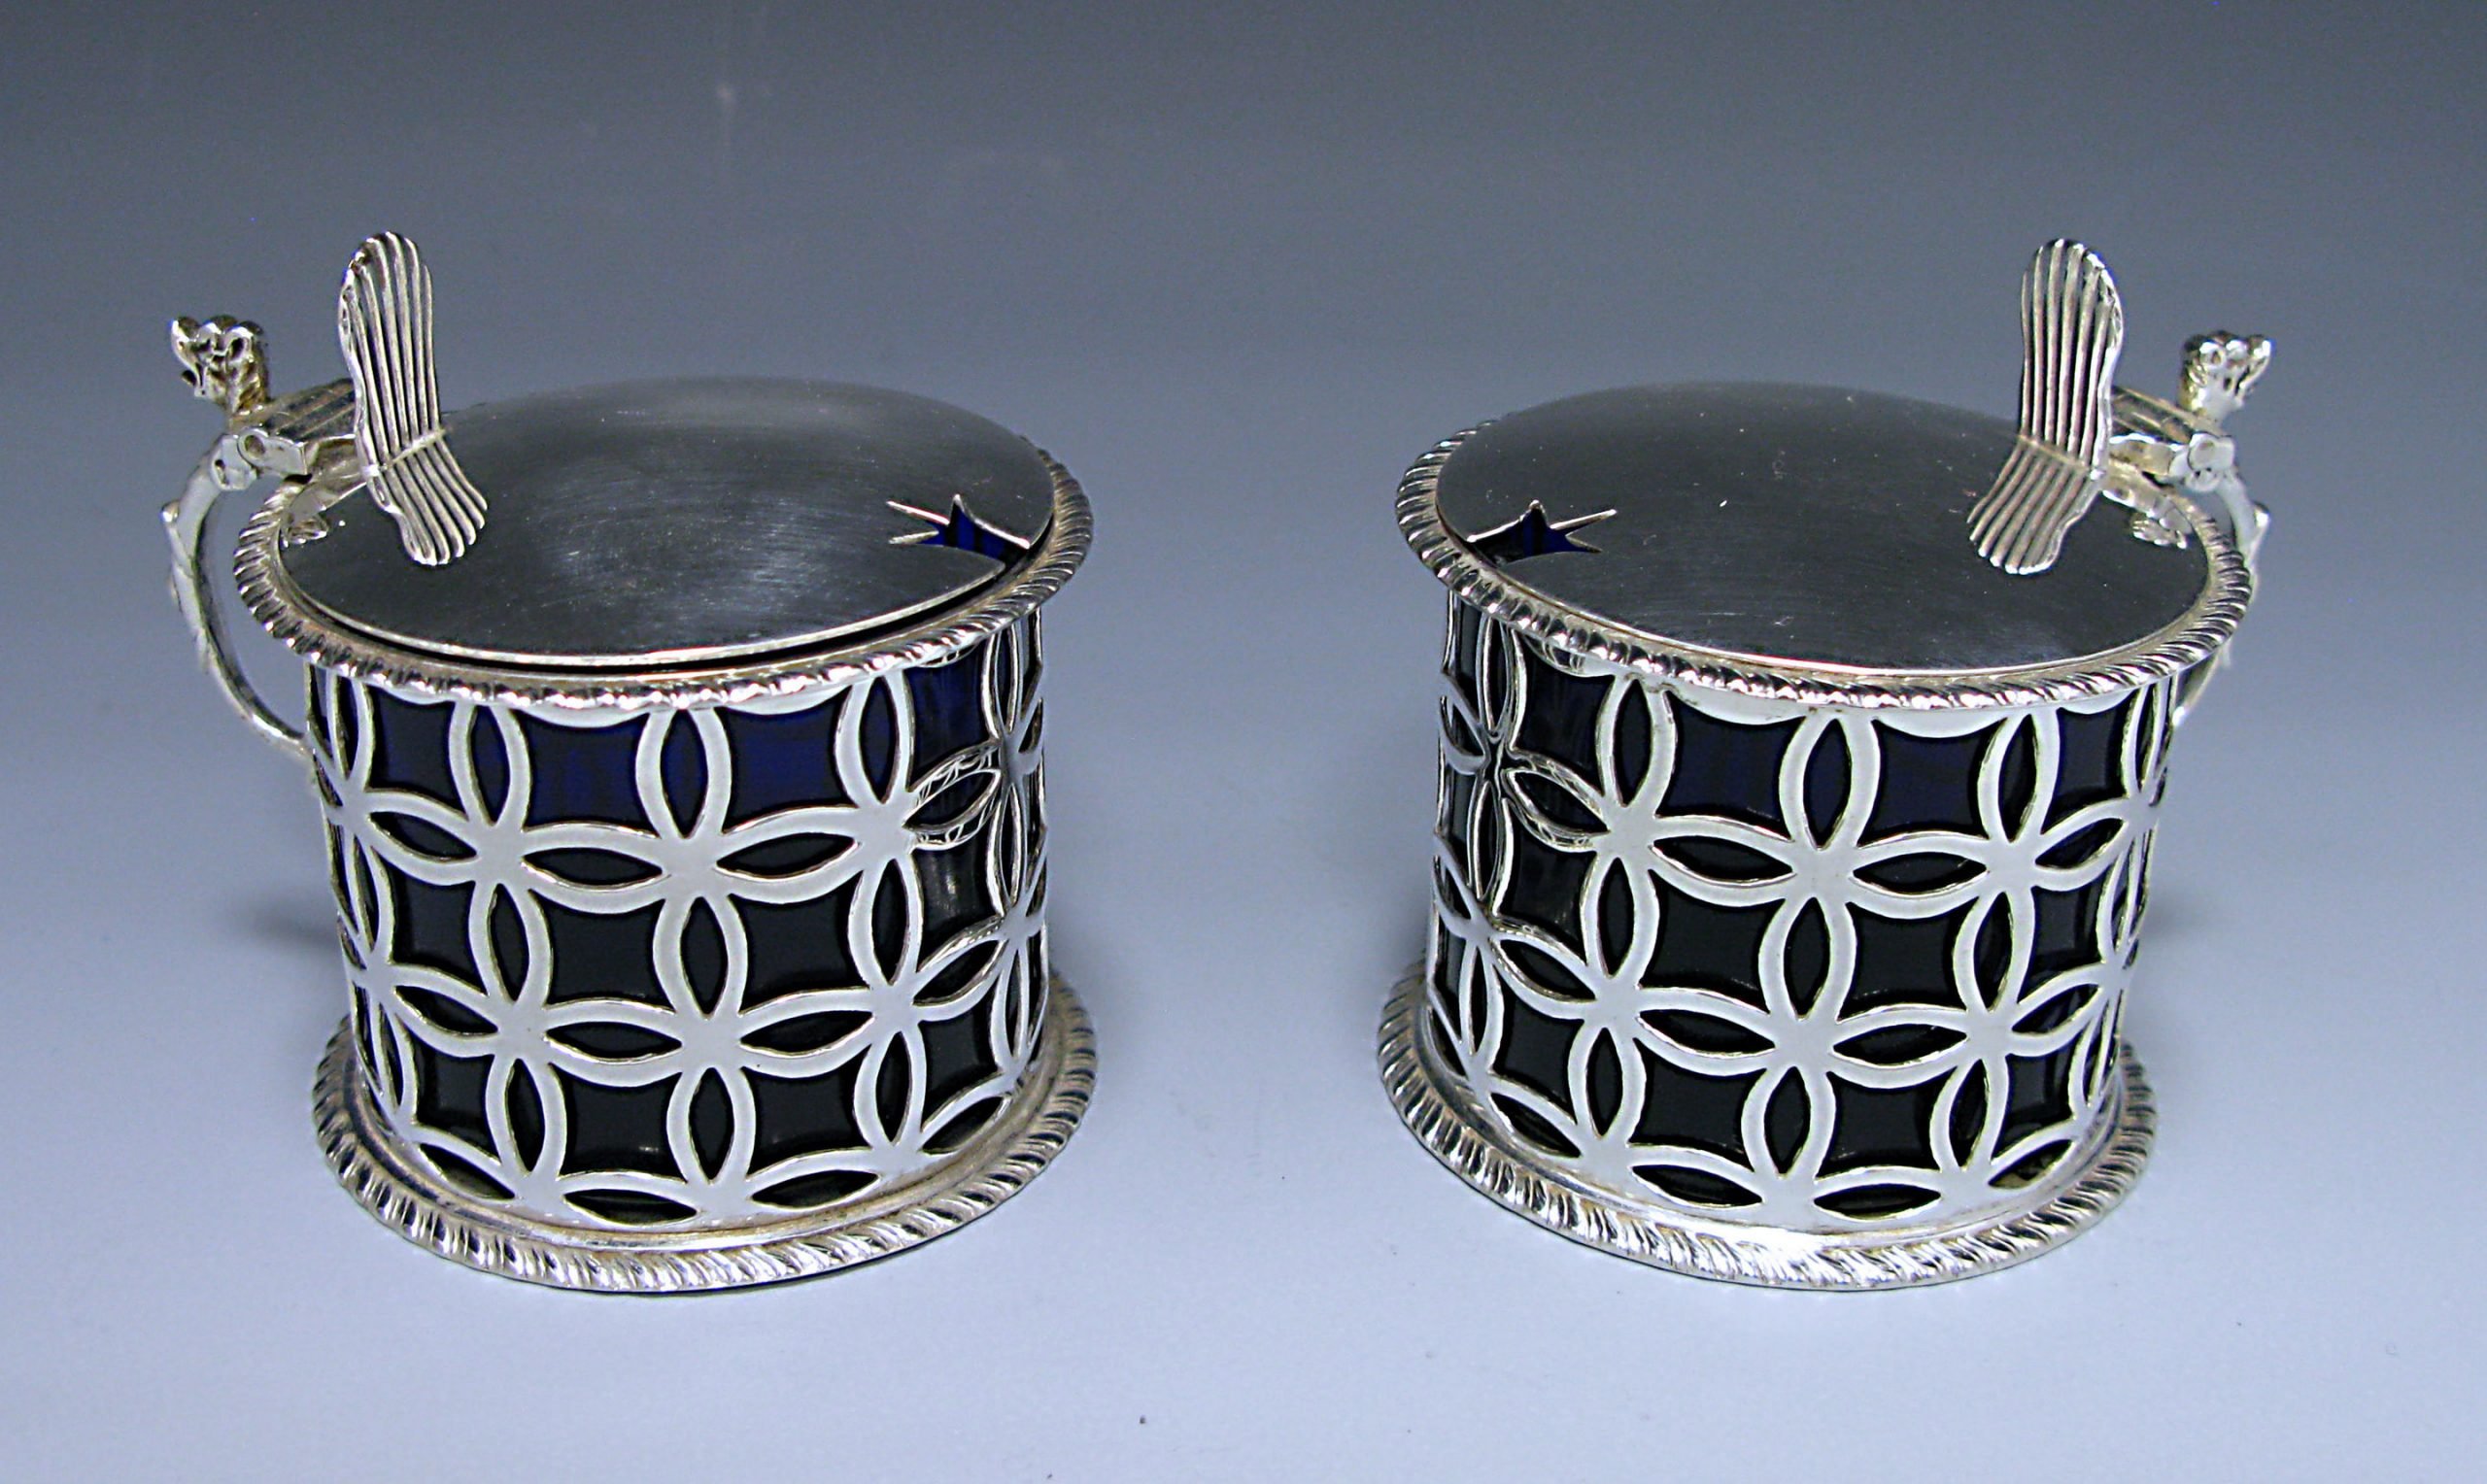 Pair of Edwardian Antique Sterling Silver Mustards 1